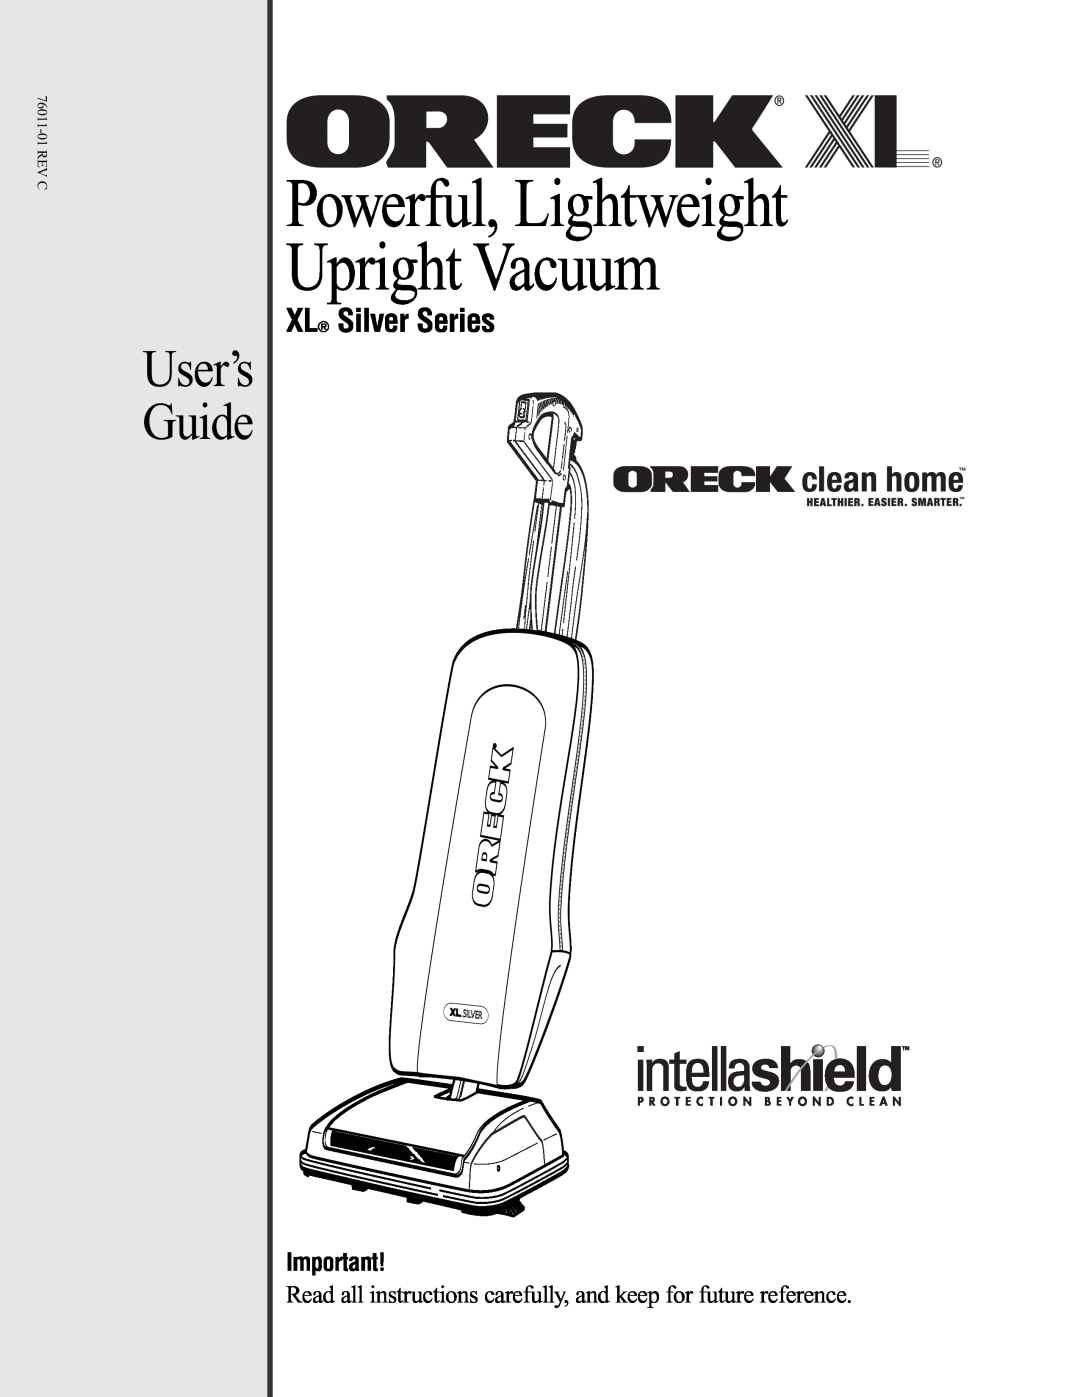 Oreck 76011-01REVC manual User’s Guide, XL Silver Series, Powerful, Lightweight Upright Vacuum 